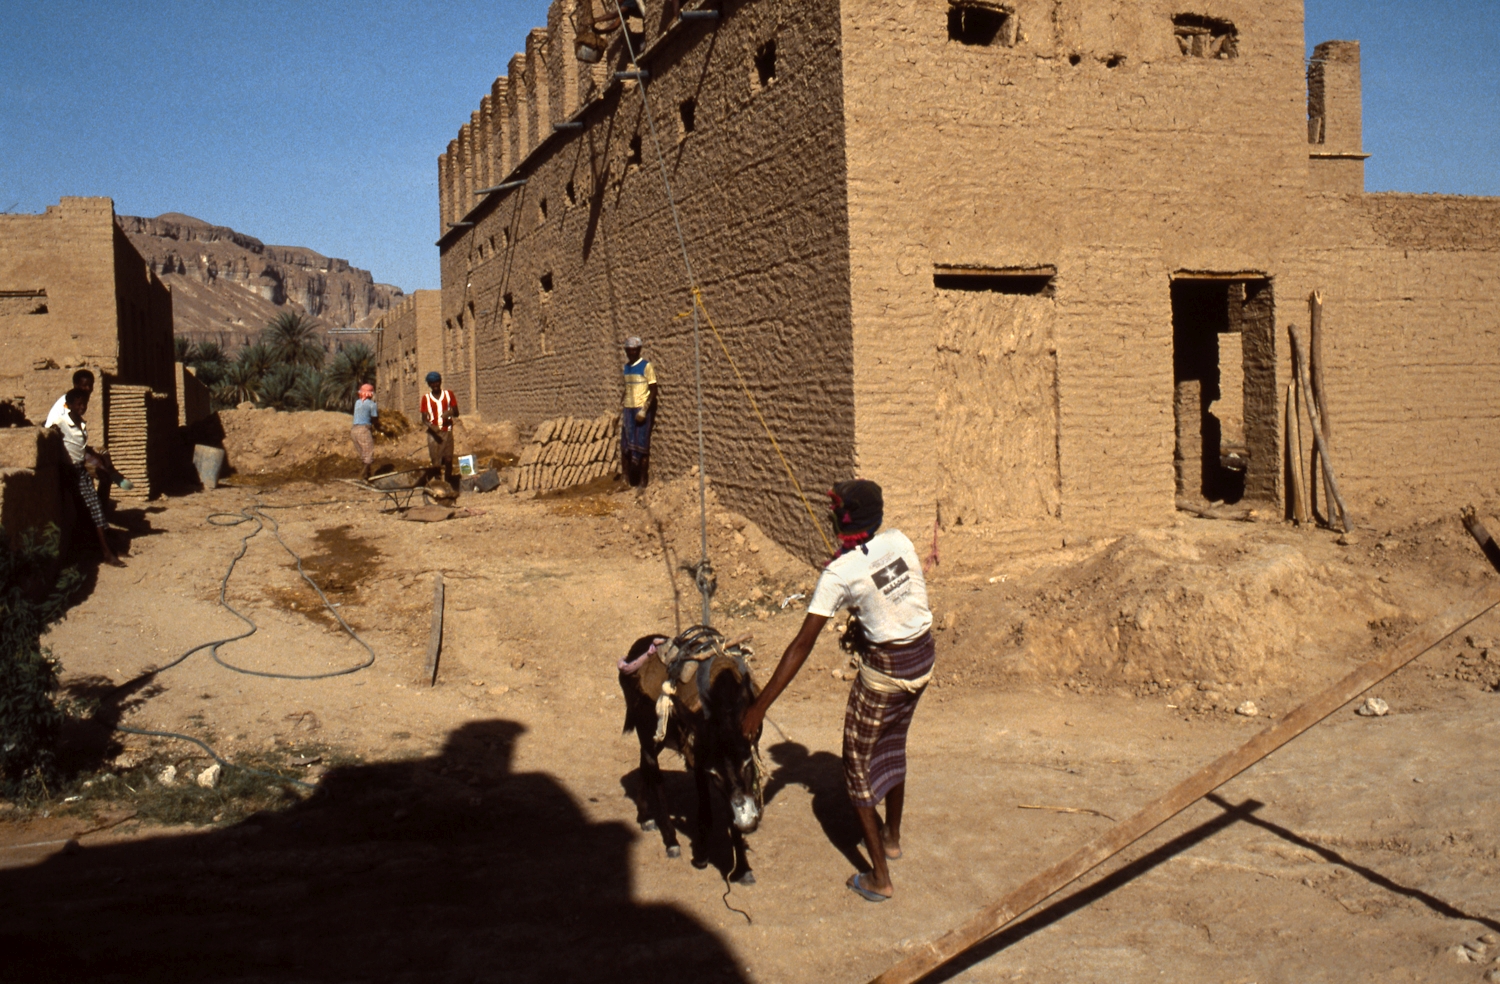 Peggy Crawford - Hadramaut. Construction workers using a pulley and donkey in the construction of a mud brick house